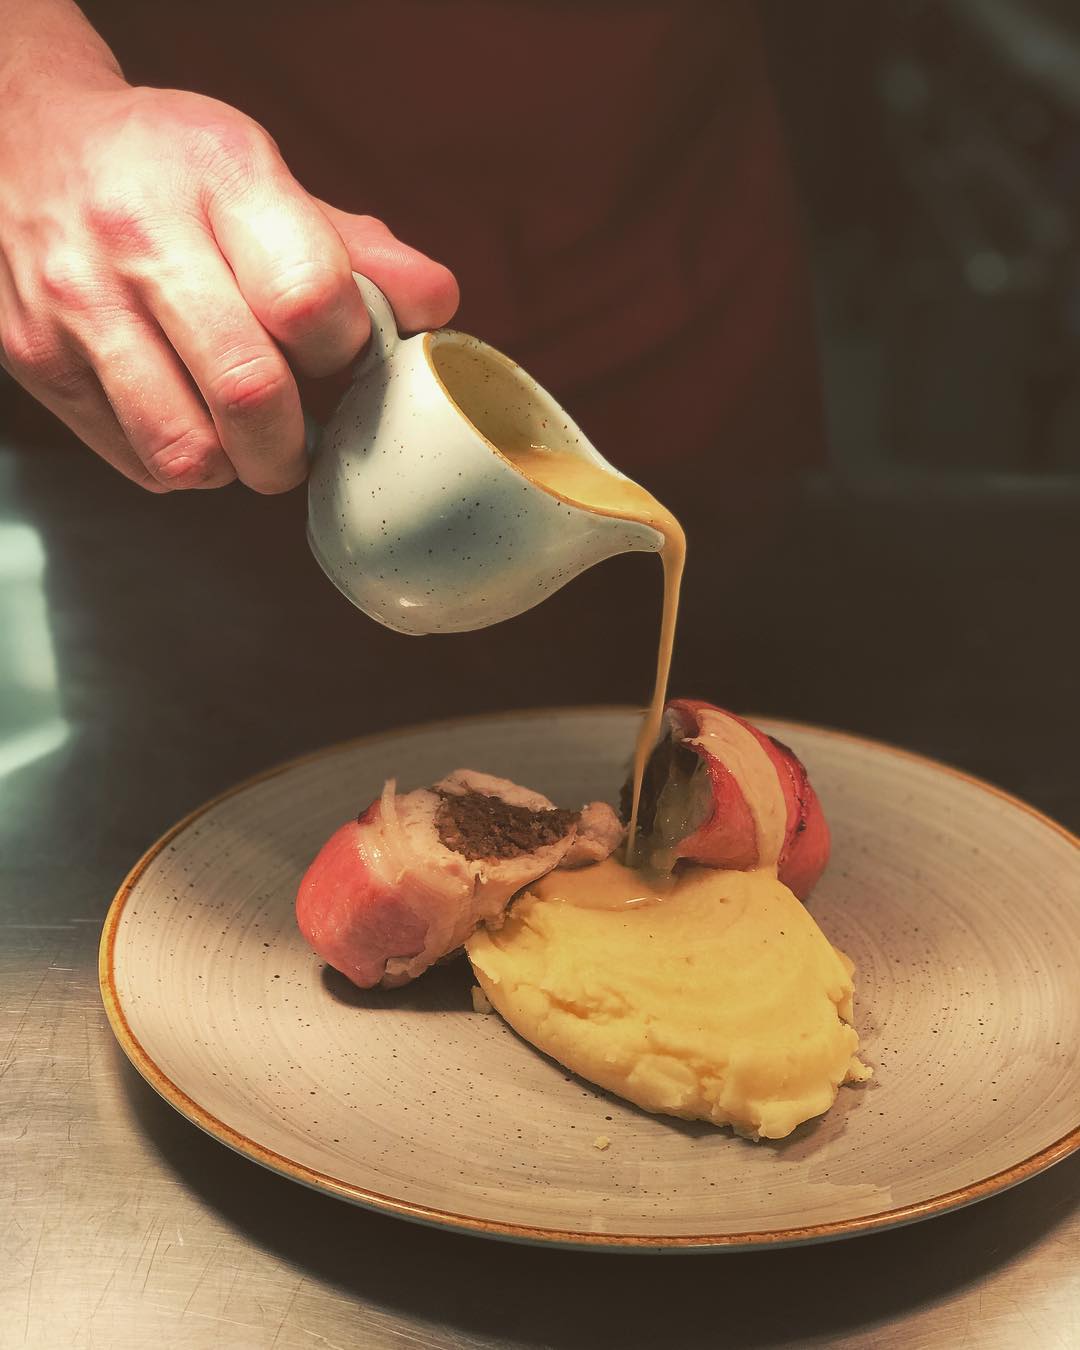 Andy and his Balmoral Chicken. Look at that pouring technique. Ooft.
.
.
#cumbriafood #lakedistrict #lakedistrictuk #cumbriafoodie #cumbria #penrith #carlisle #balmoralchicken #creamymash #food #foodie #wine #haggis #scotland #justovertheborder